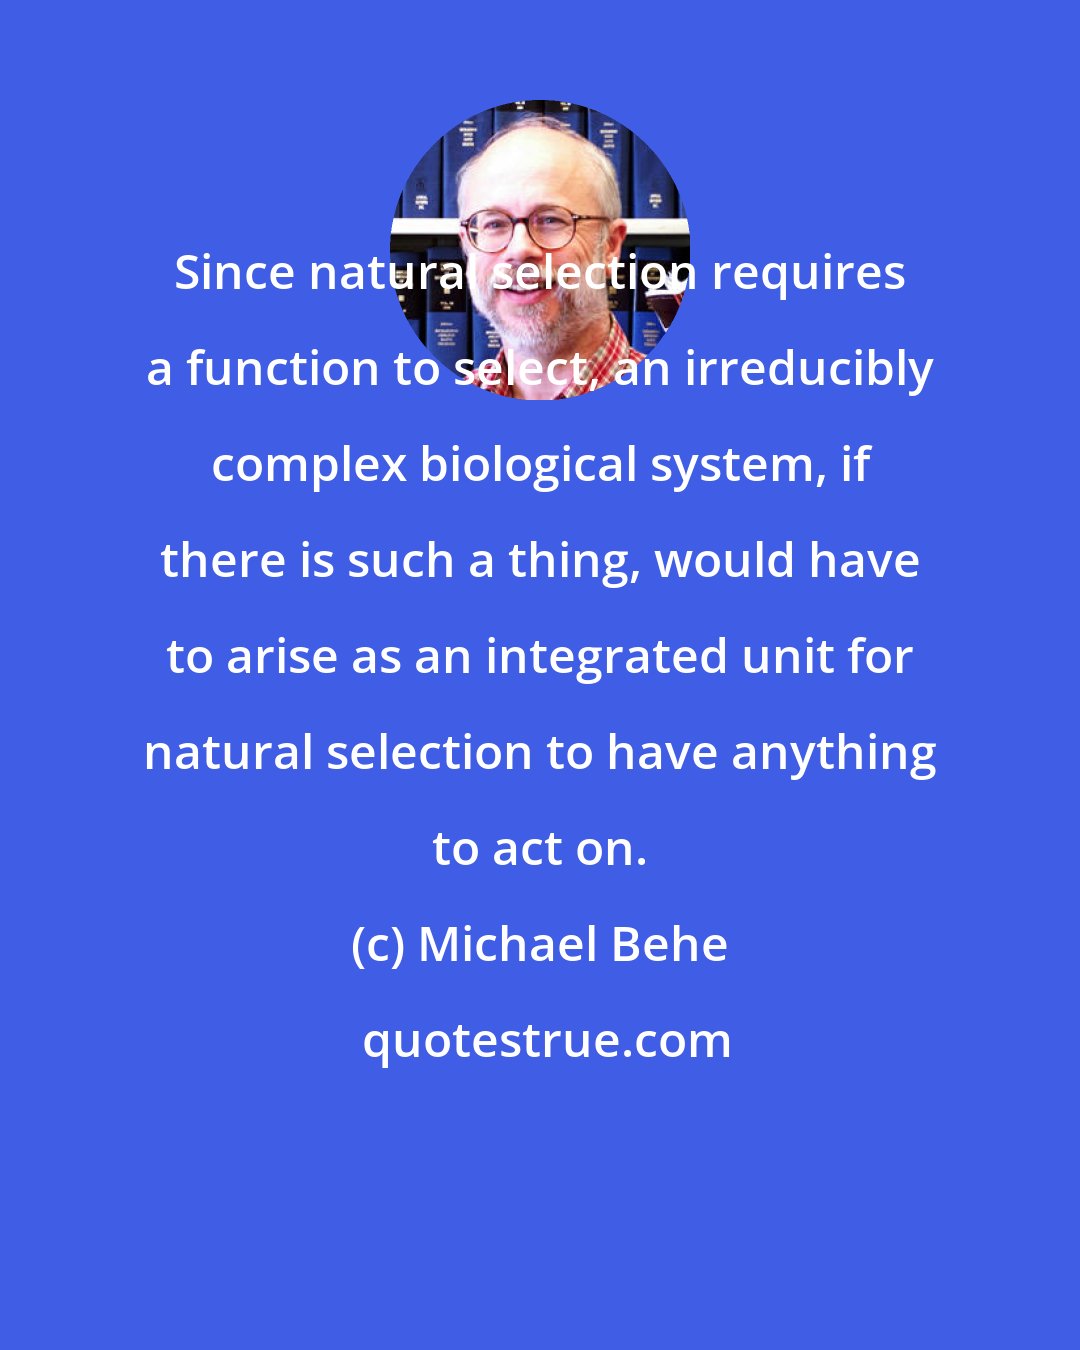 Michael Behe: Since natural selection requires a function to select, an irreducibly complex biological system, if there is such a thing, would have to arise as an integrated unit for natural selection to have anything to act on.